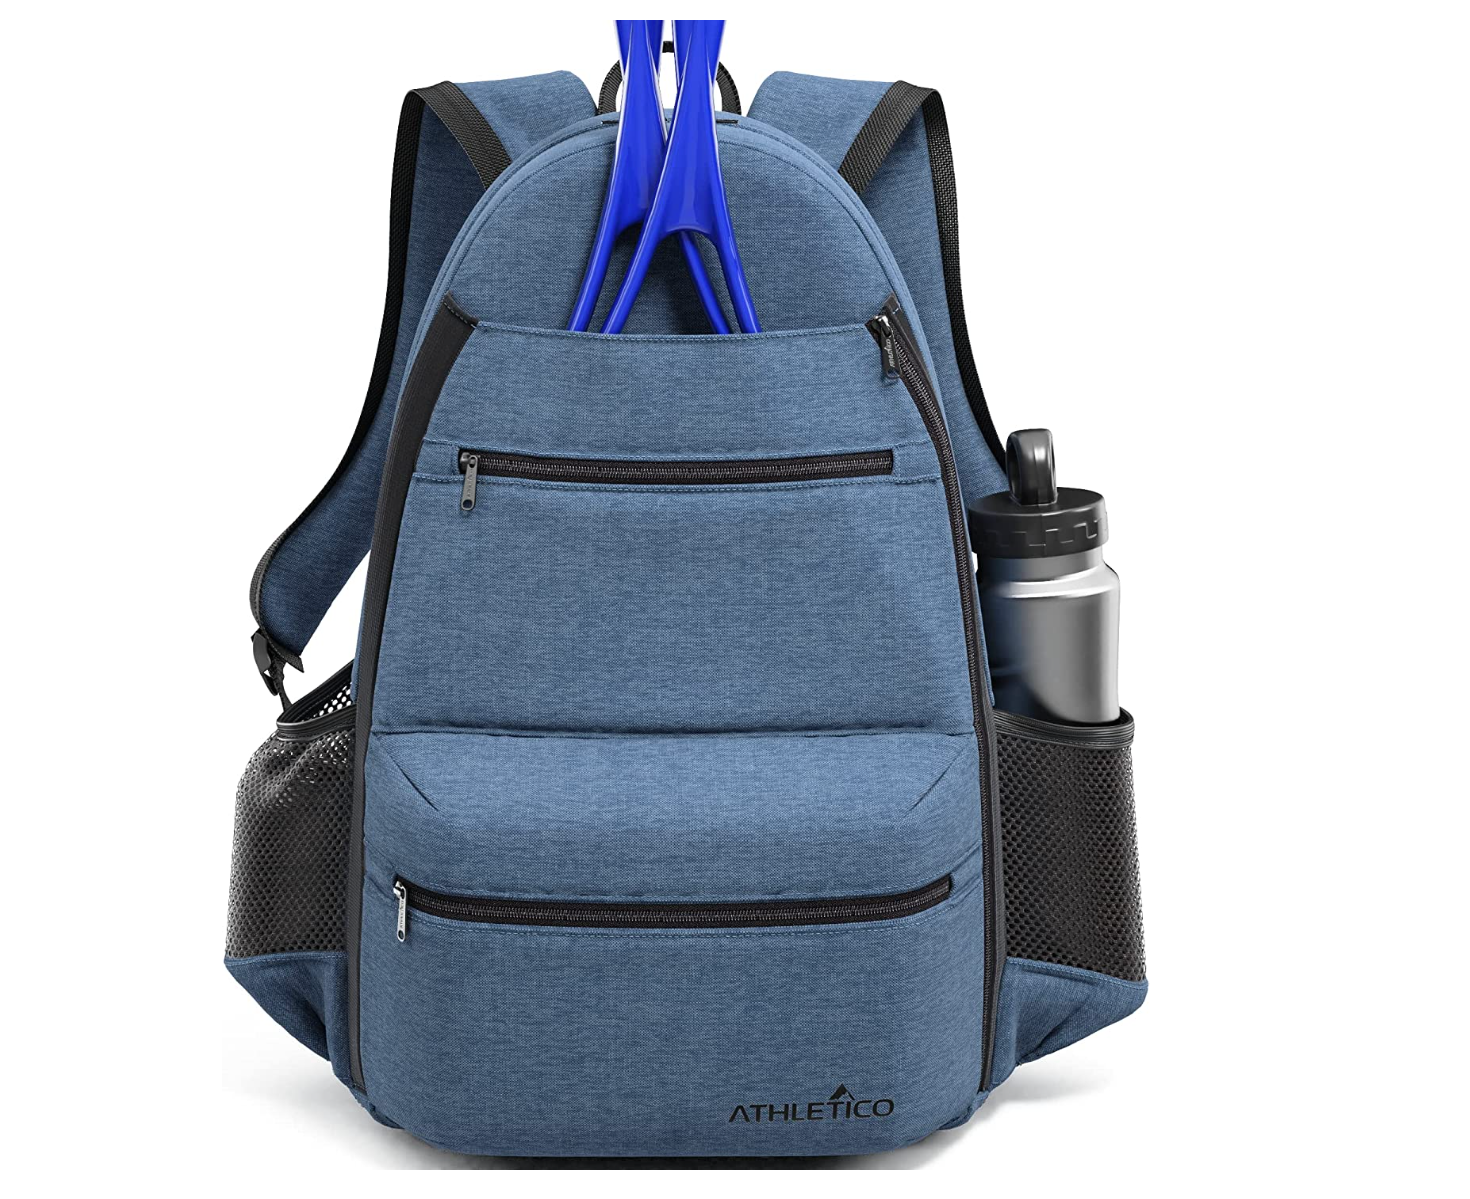 Athletico backpack